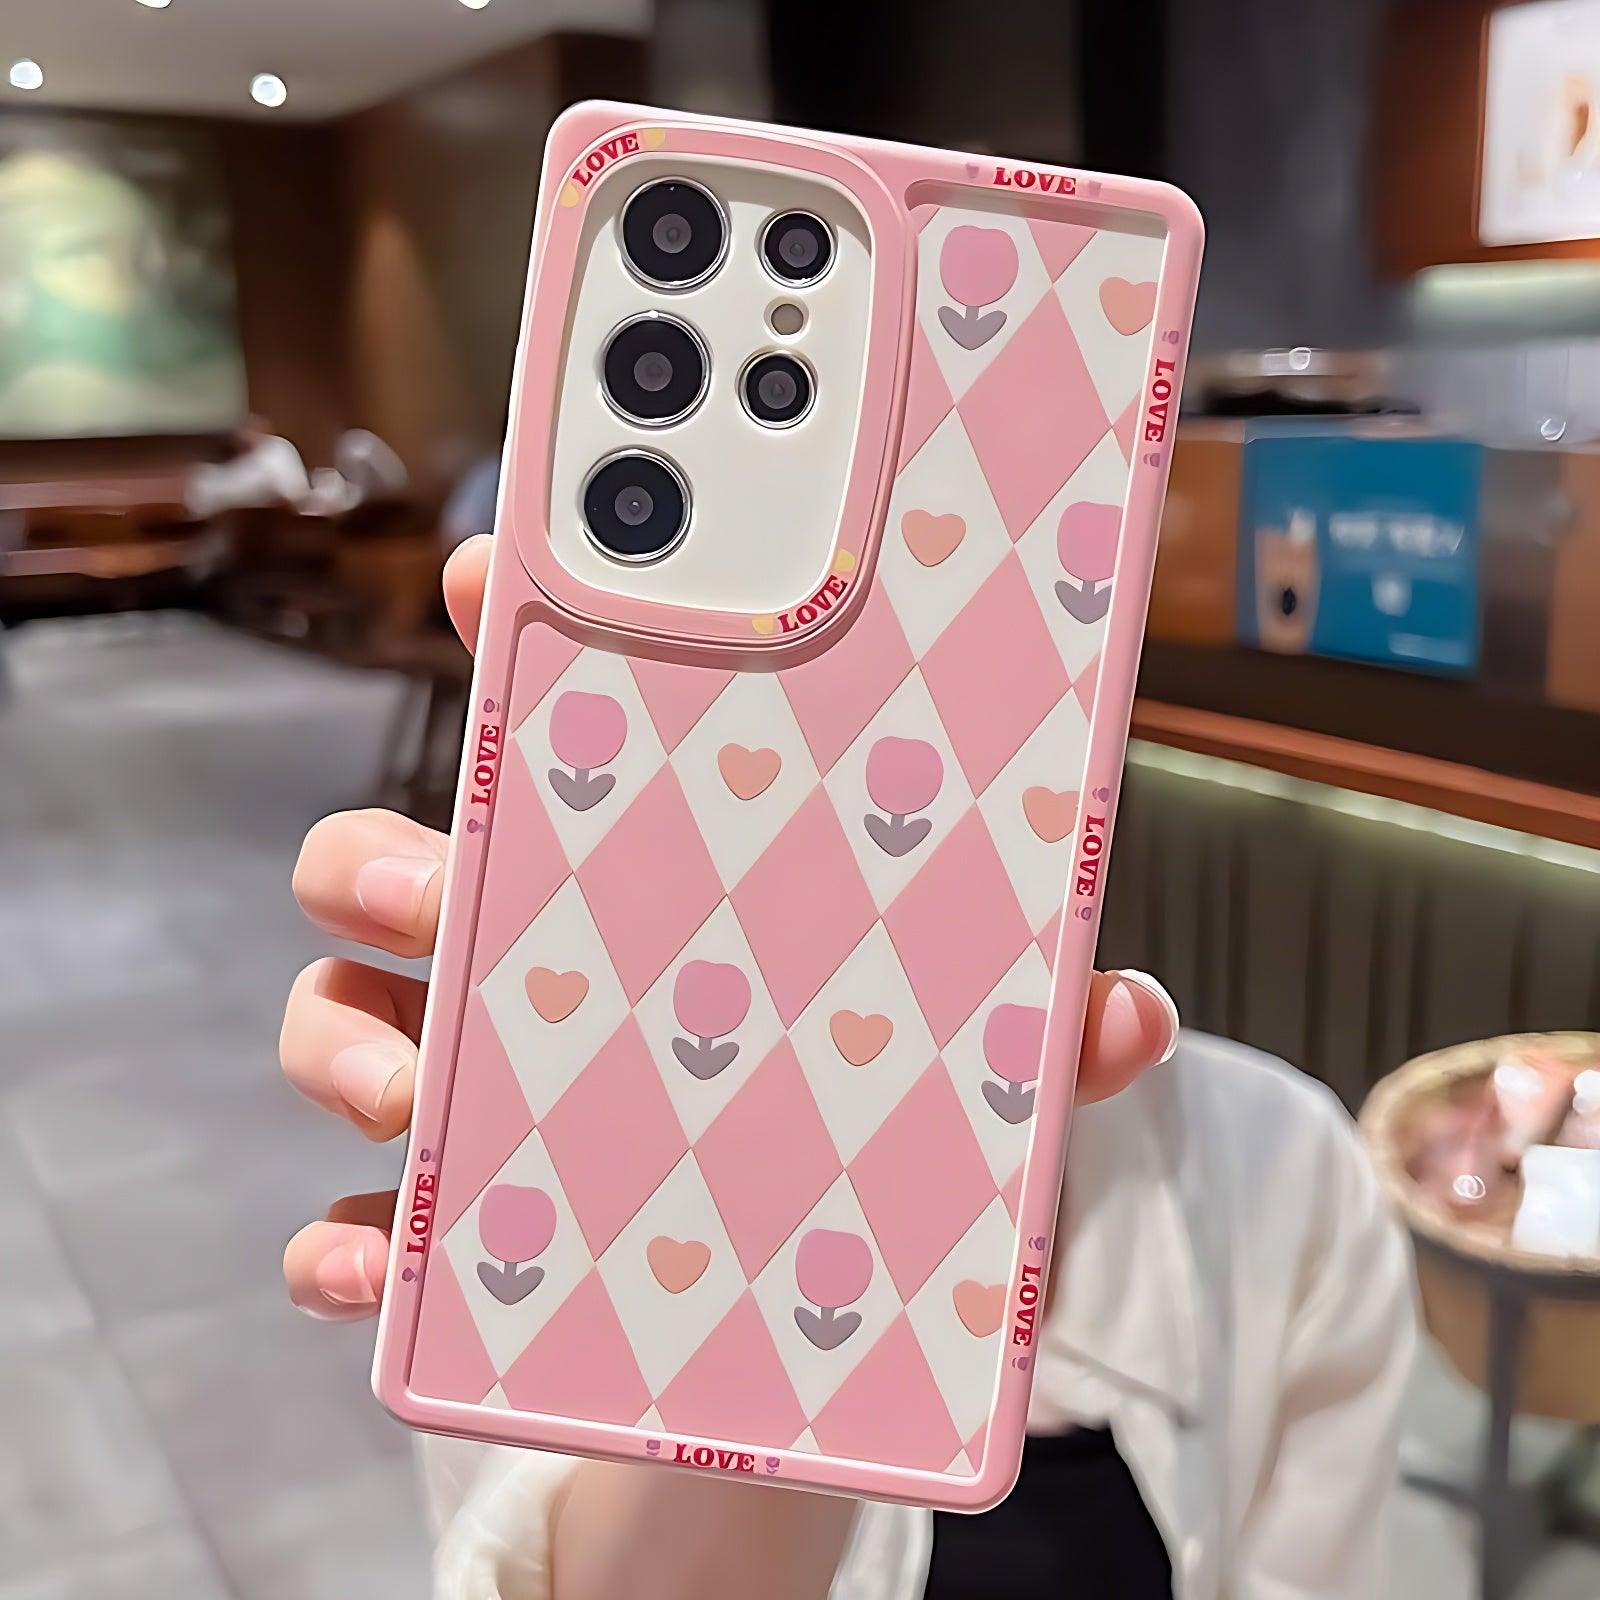 Huawei P20 Pro Cute Phone Cases - Touchy Style .